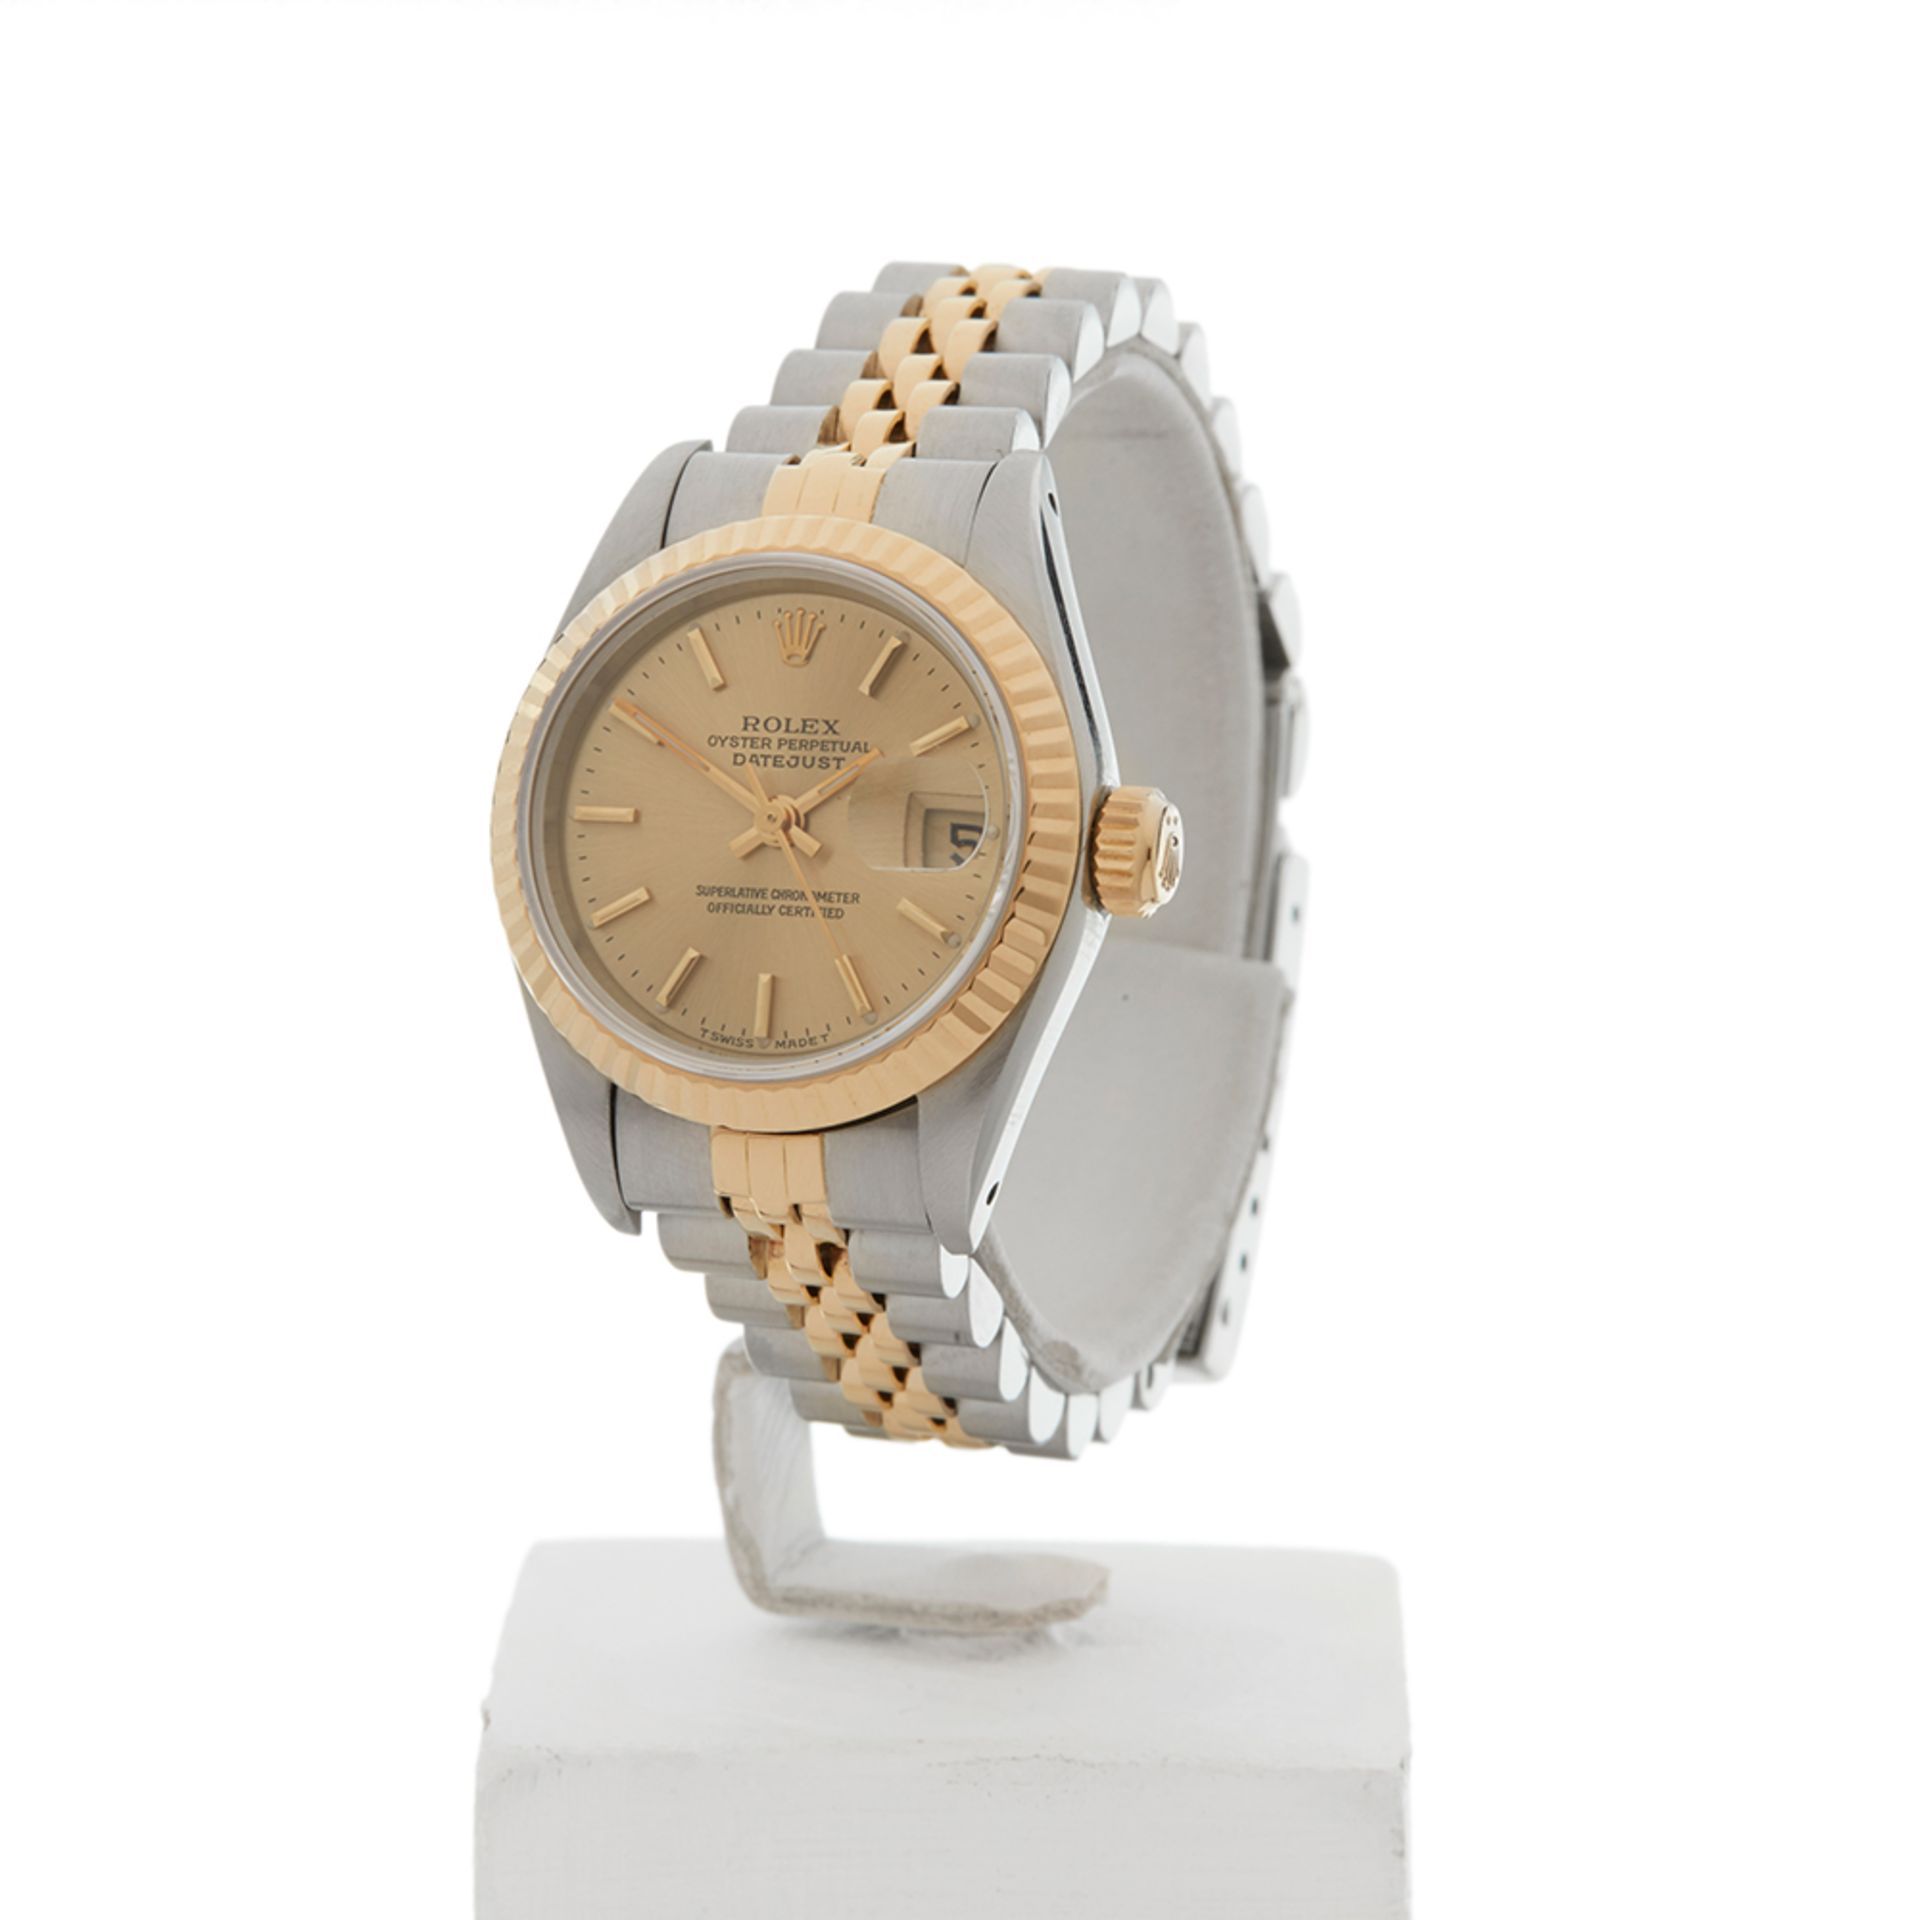 Datejust 26mm Stainless Steel & 18k Yellow Gold 69173 - Image 3 of 9